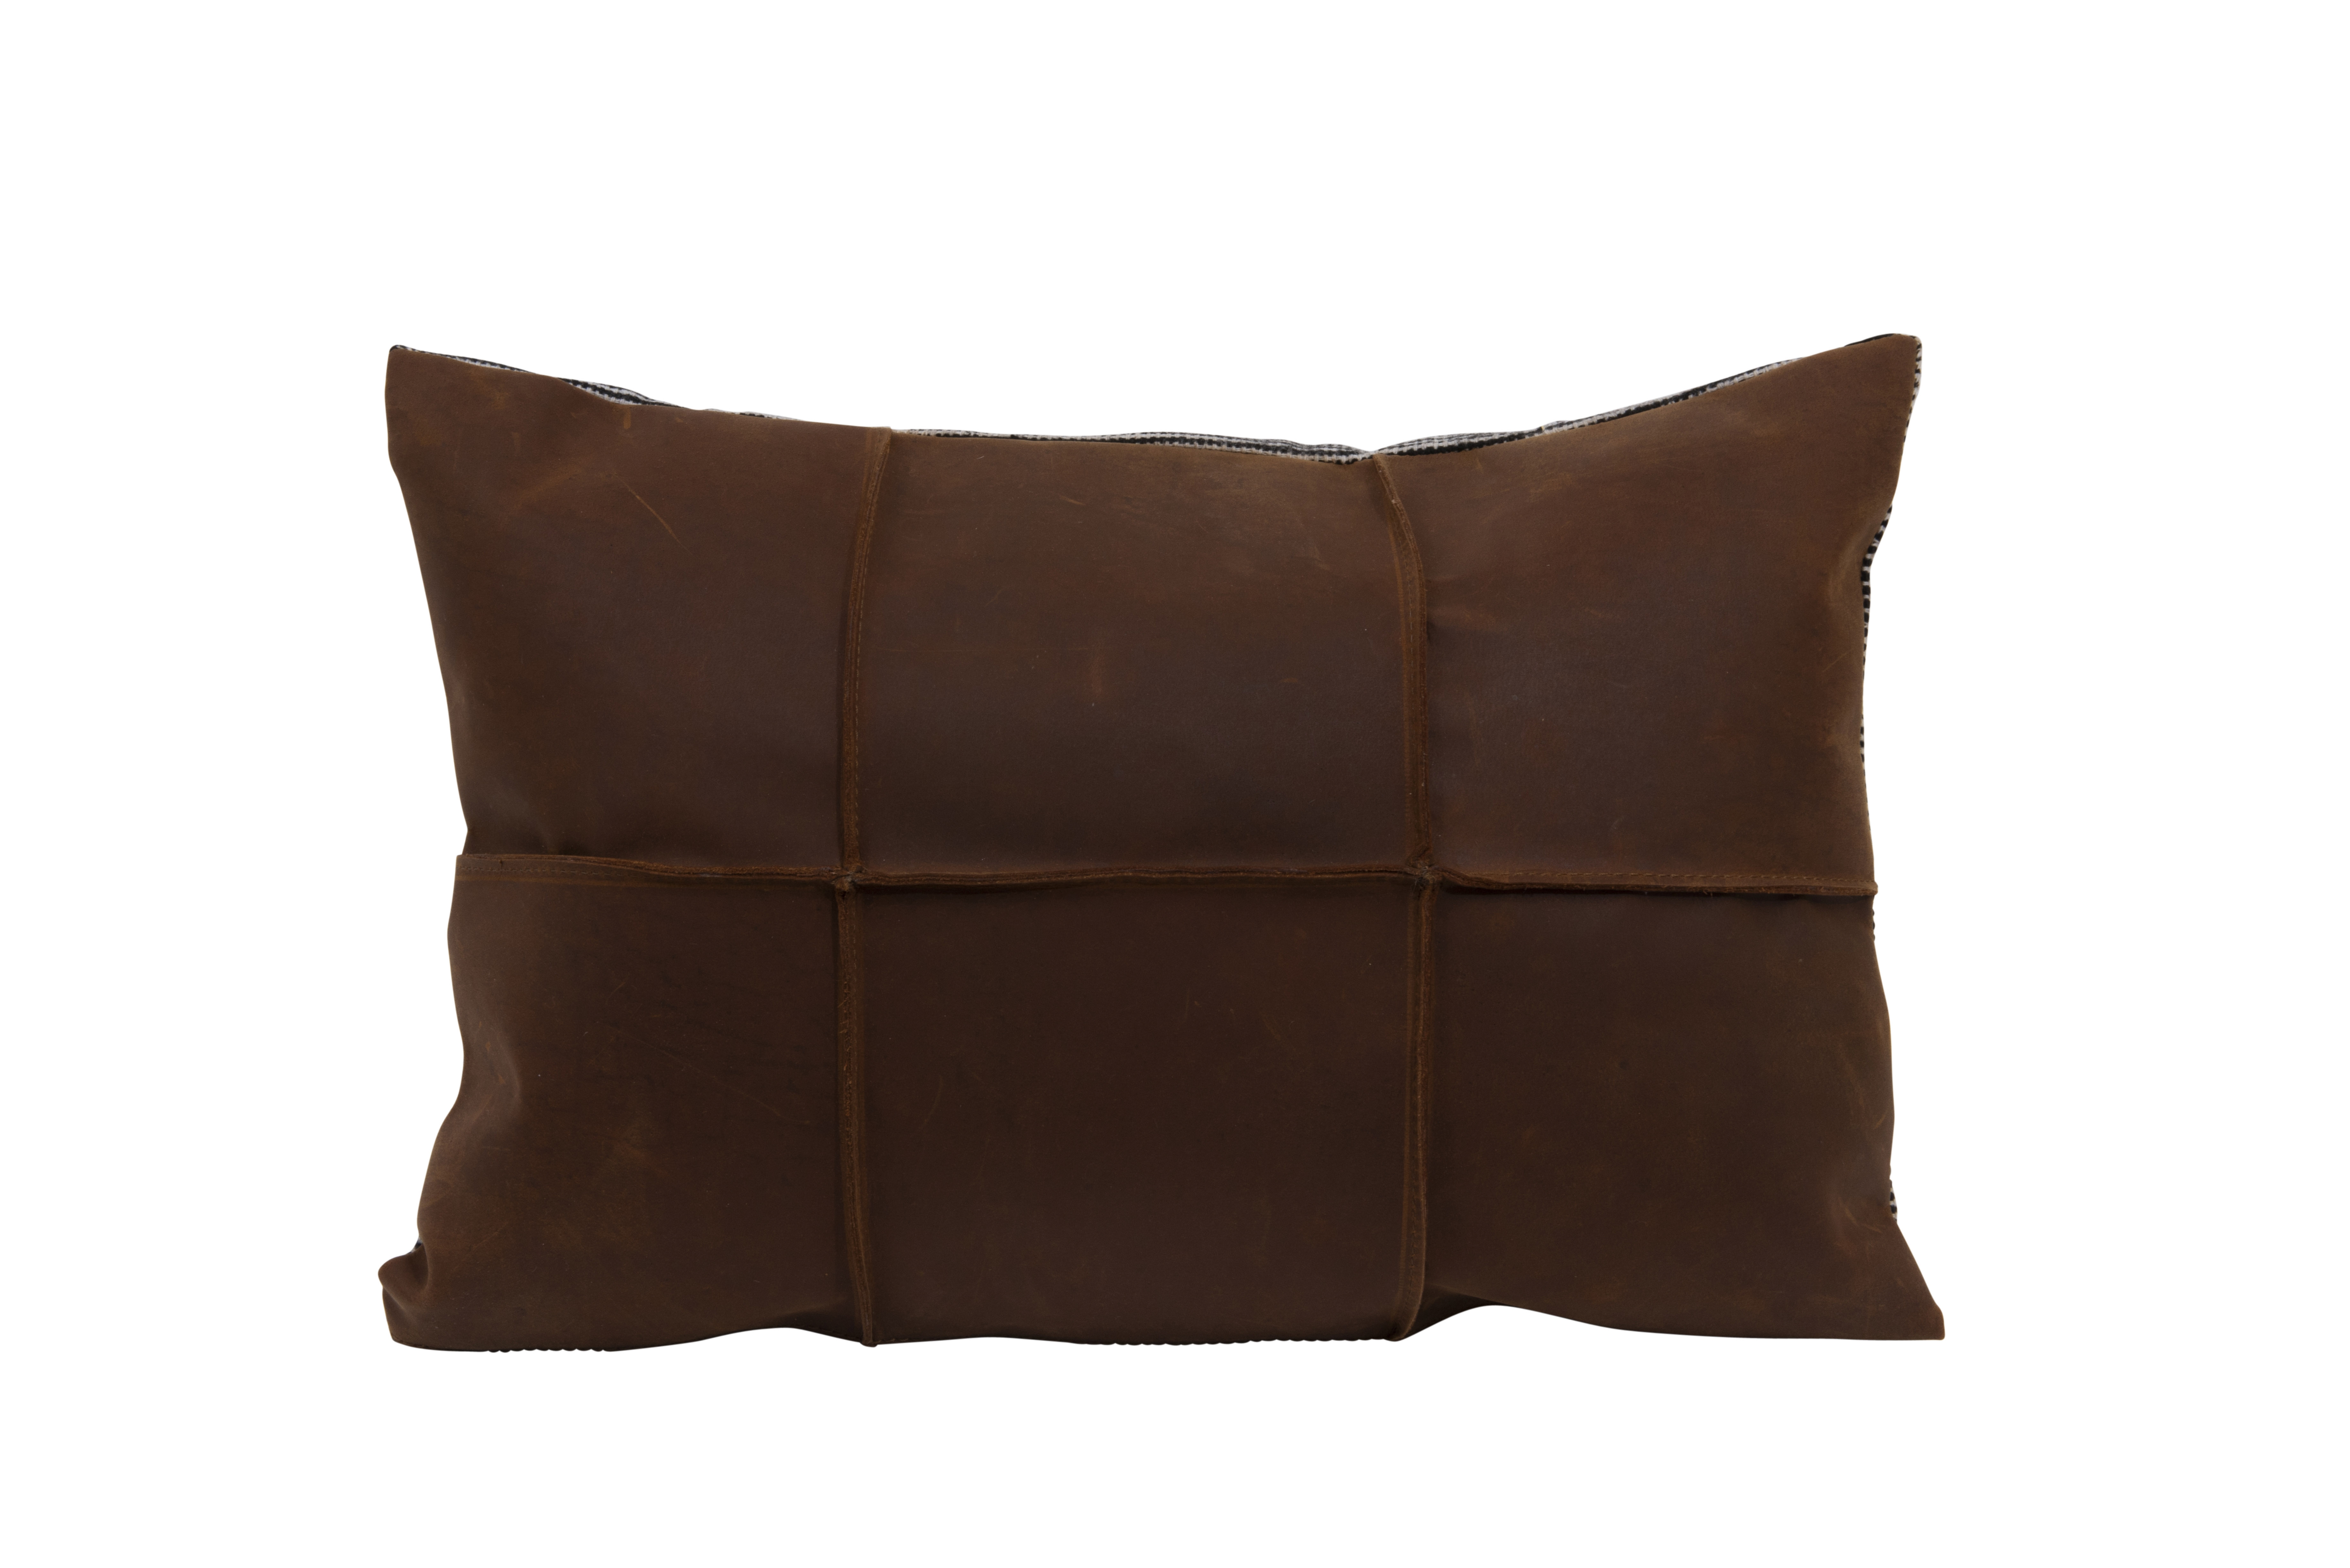 Brown Leather Pillow with Black & White Striped Felt Back - Nomad Home